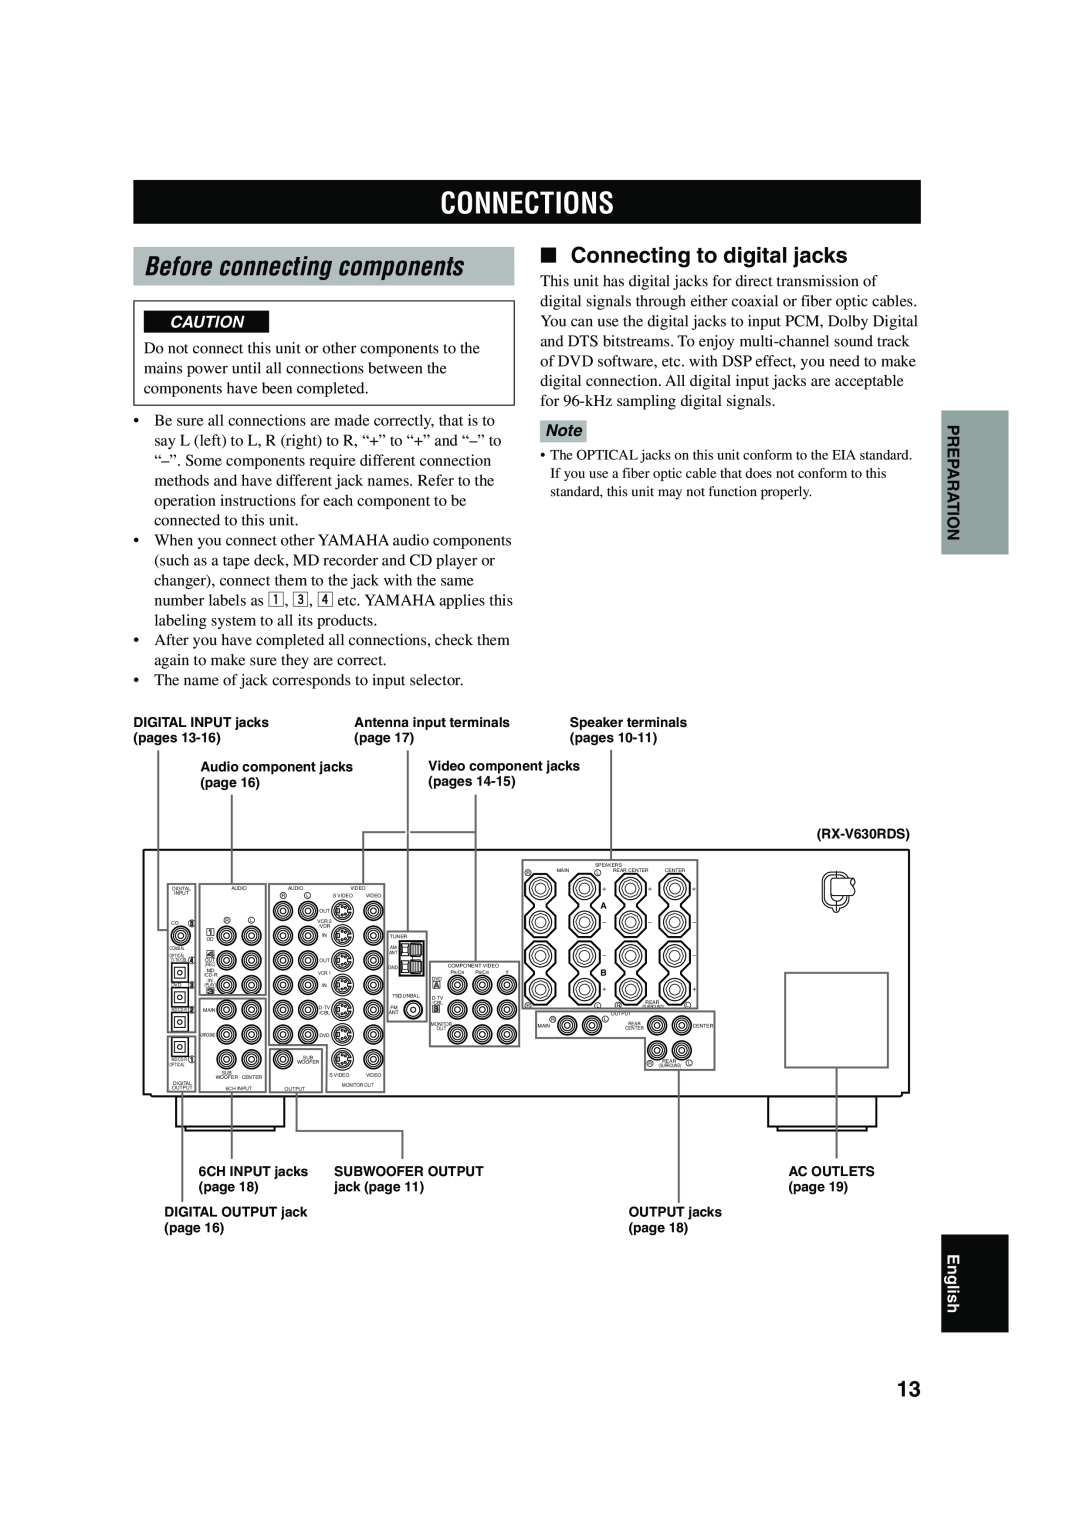 Yamaha RX-V630RDS owner manual Connections, Before connecting components, Connecting to digital jacks, English 